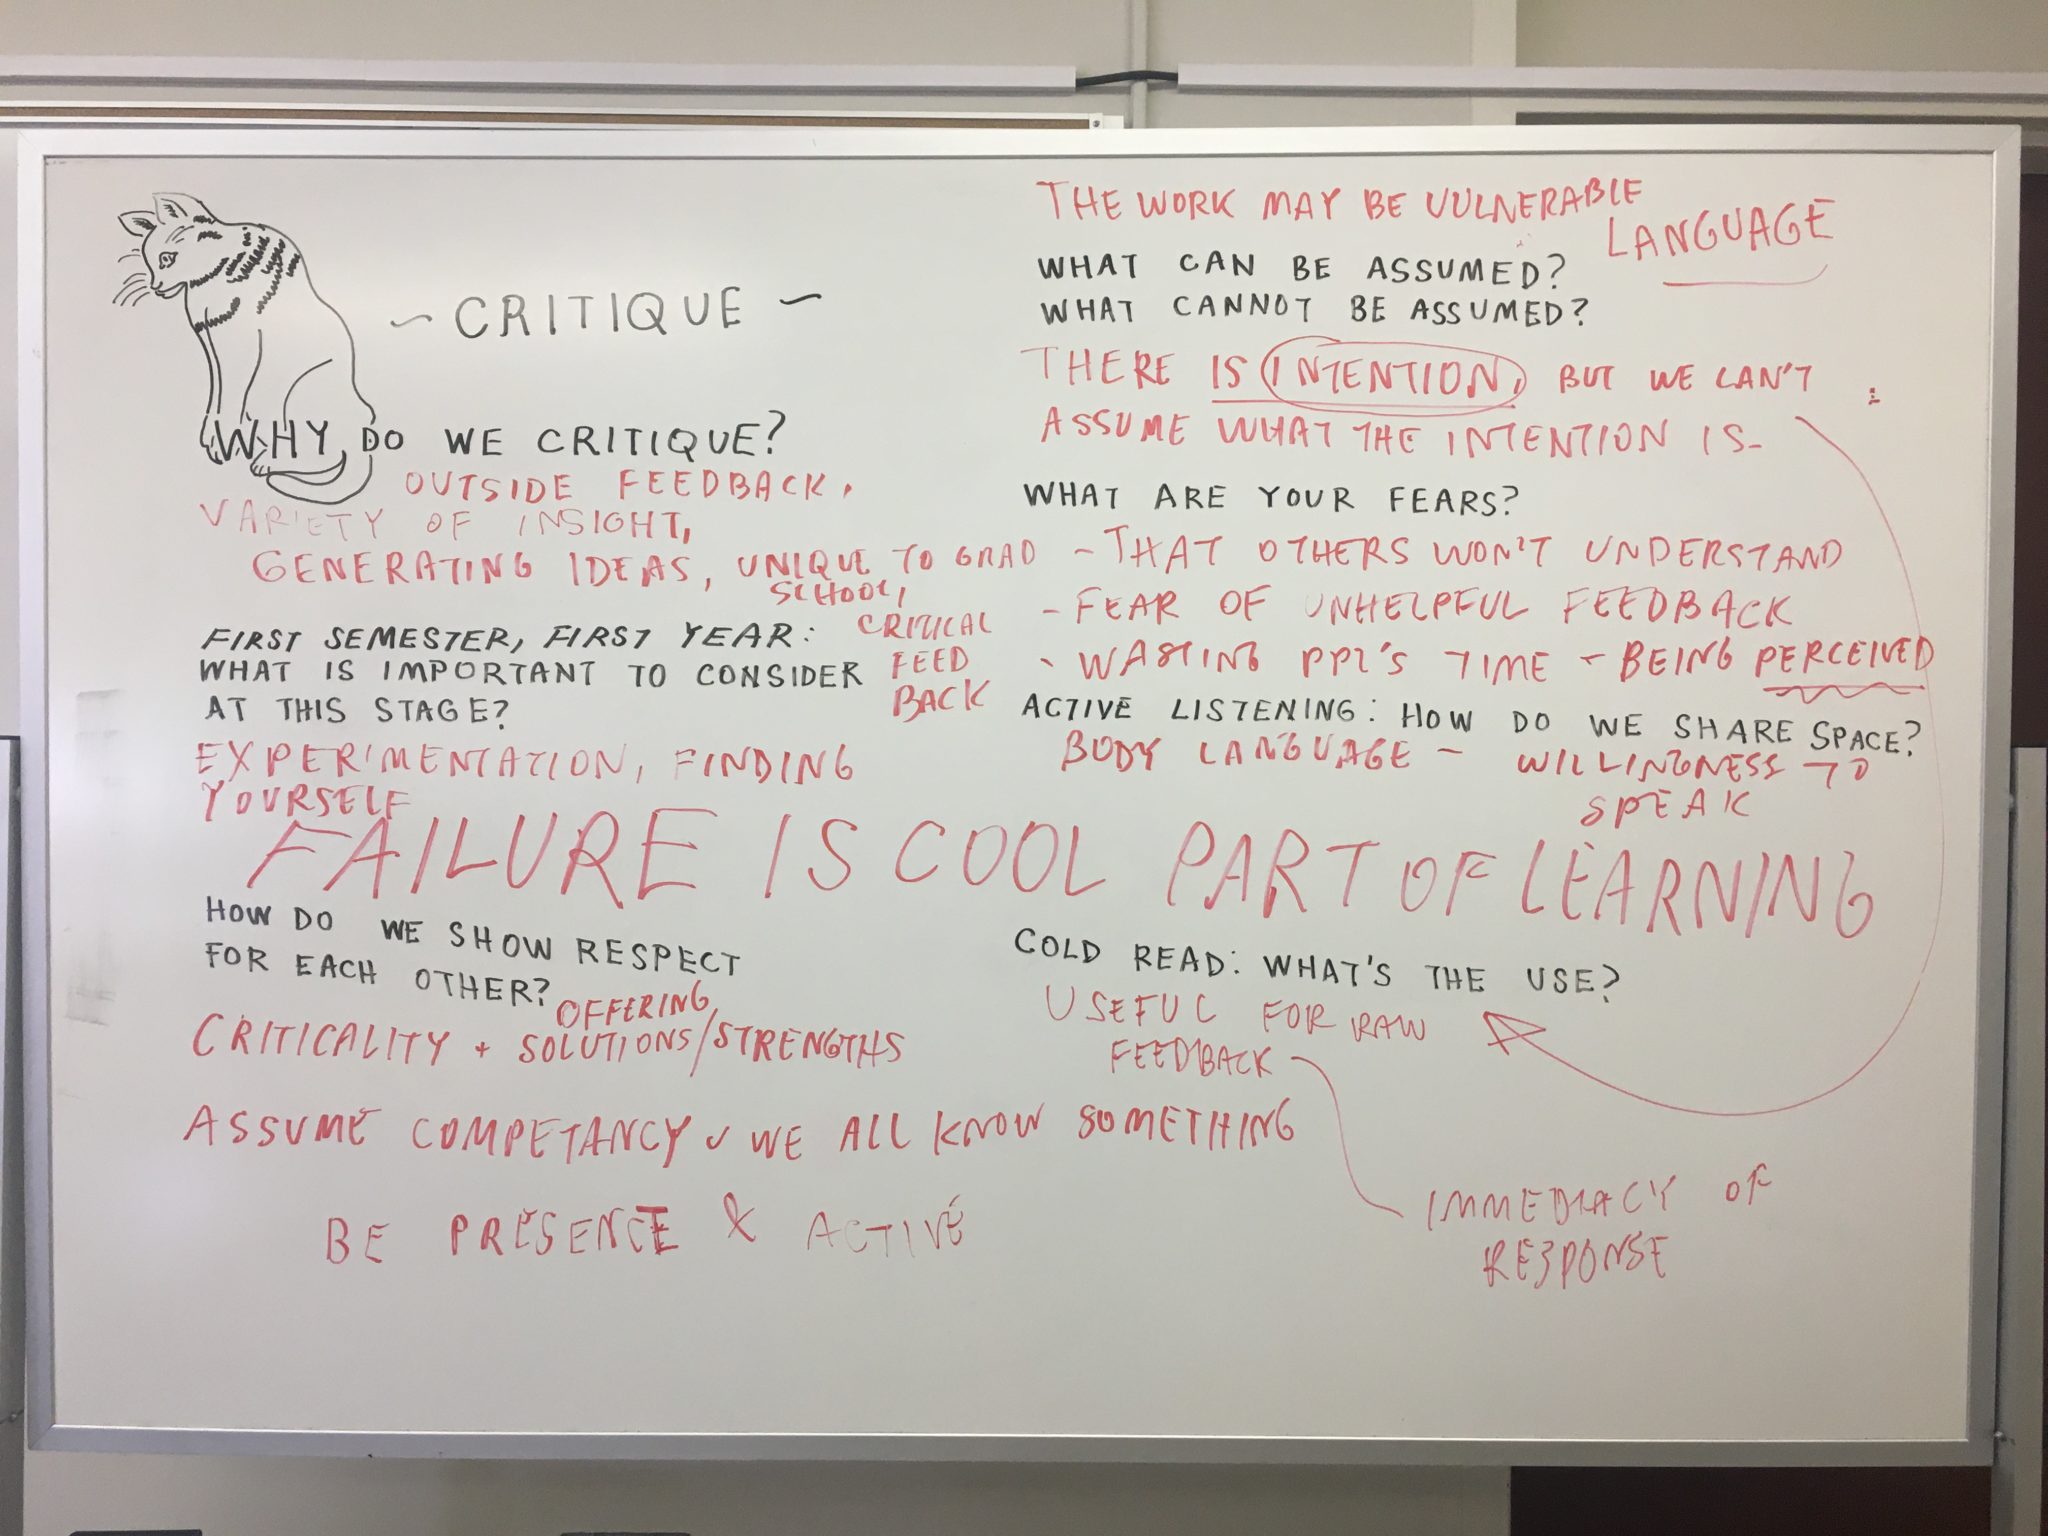 Whiteboard from Isa Gagarin's section of Graduate Critique Seminar